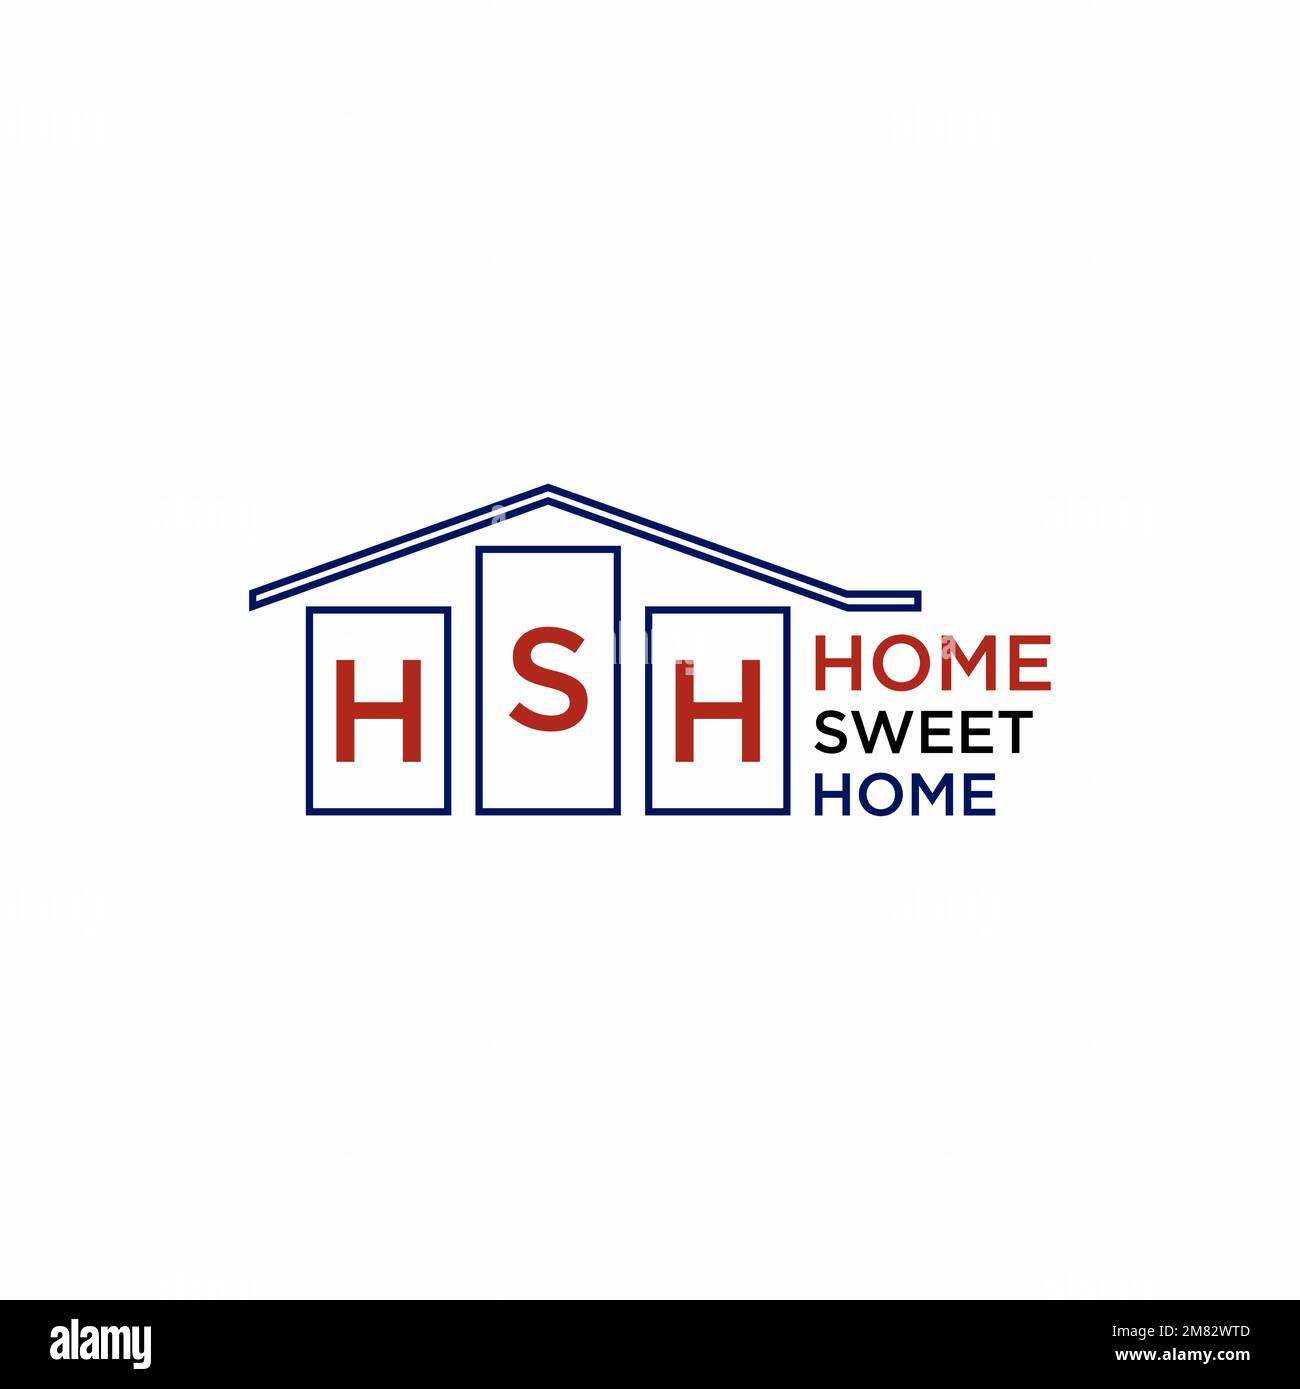 simple roof house, chart, and letter HSH font image graphic icon logo design abstract concept vector stock. Can be used related to property or trading Stock Vector